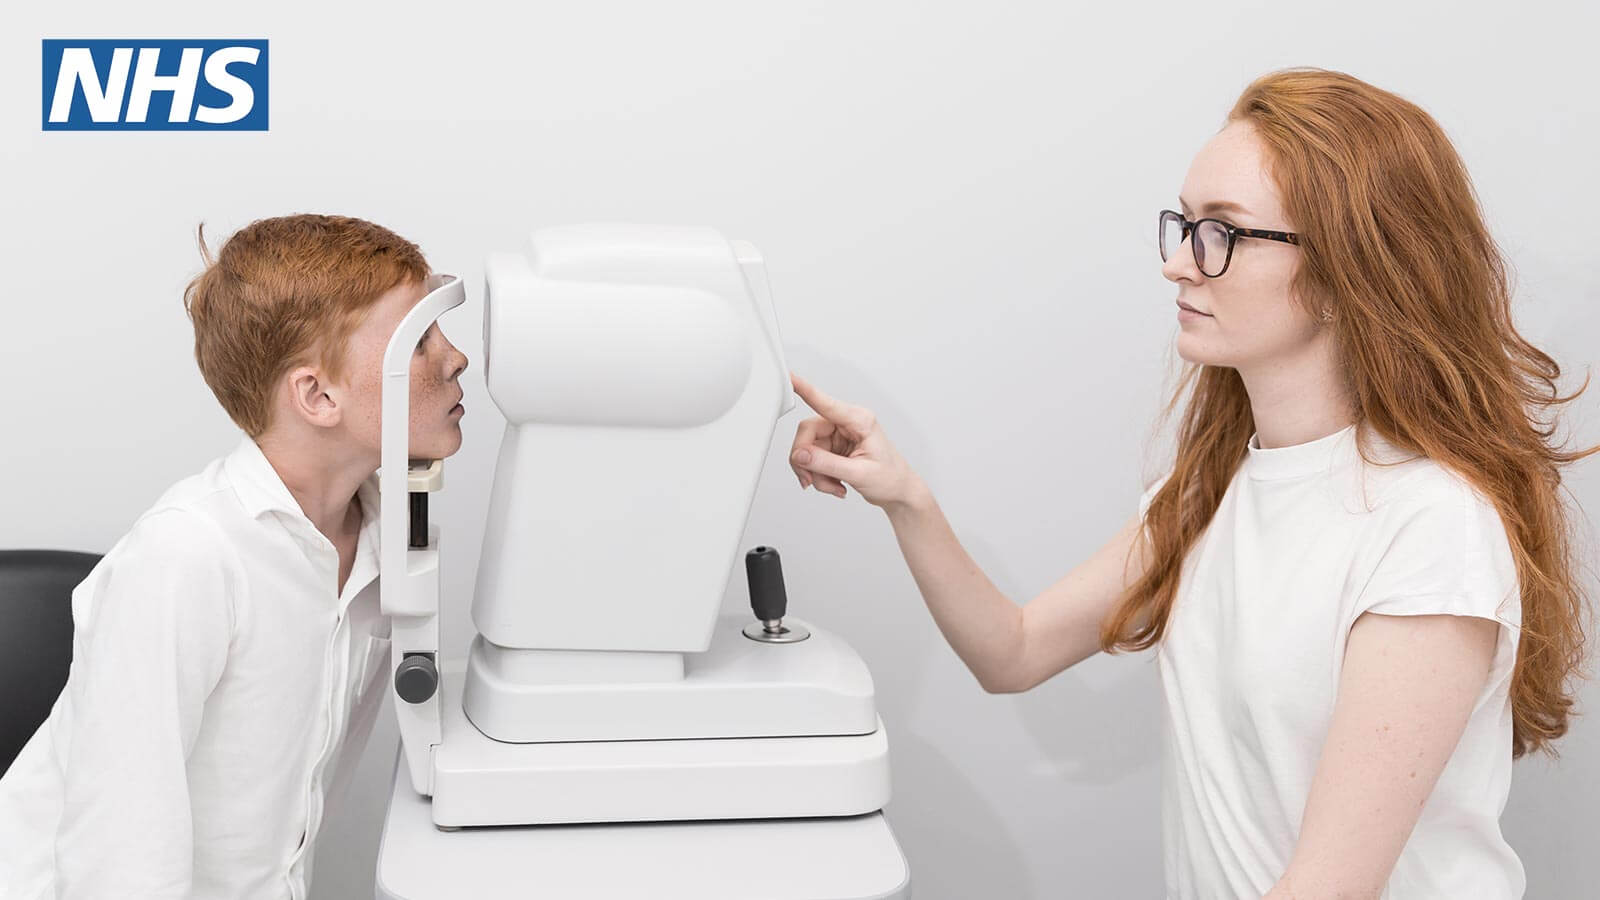 Do students get Free Eye Tests?